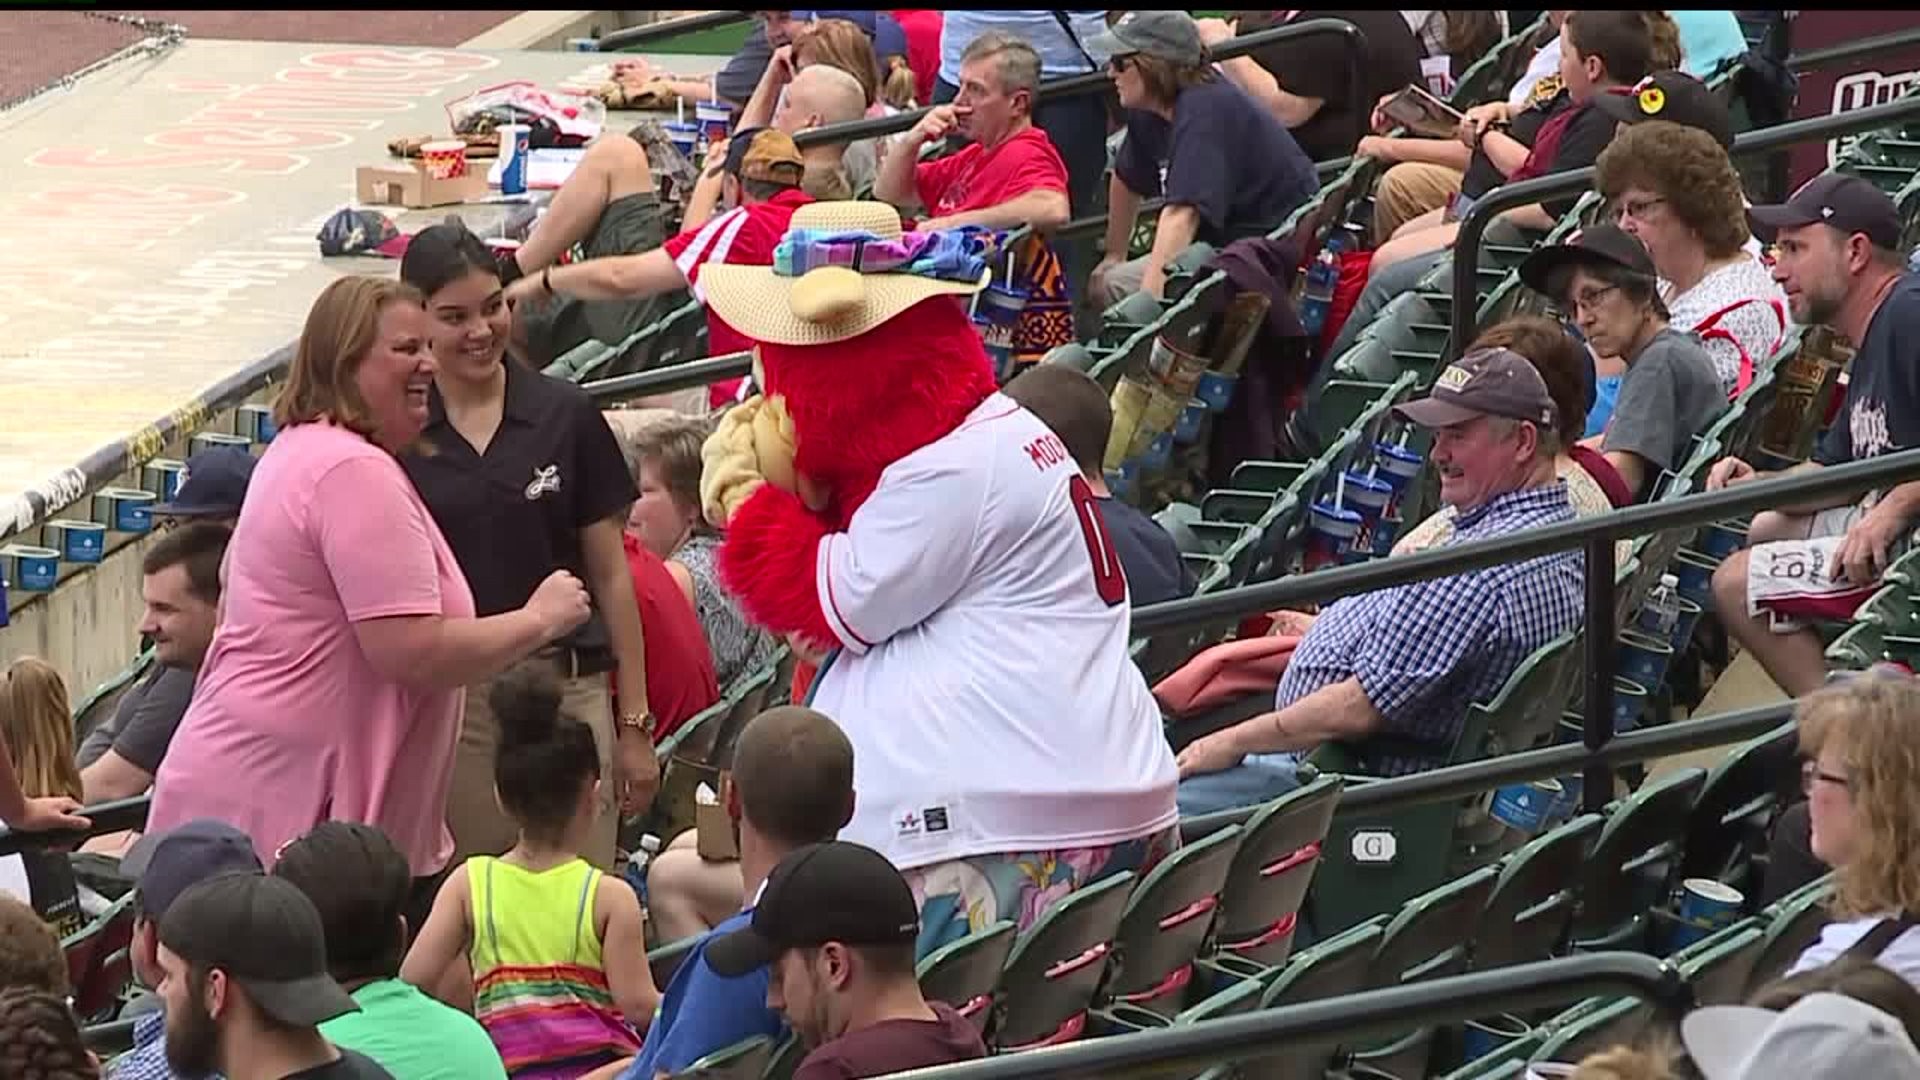 Lancaster Barnstormers will attempt to break world record of most first pitches thrown by fans